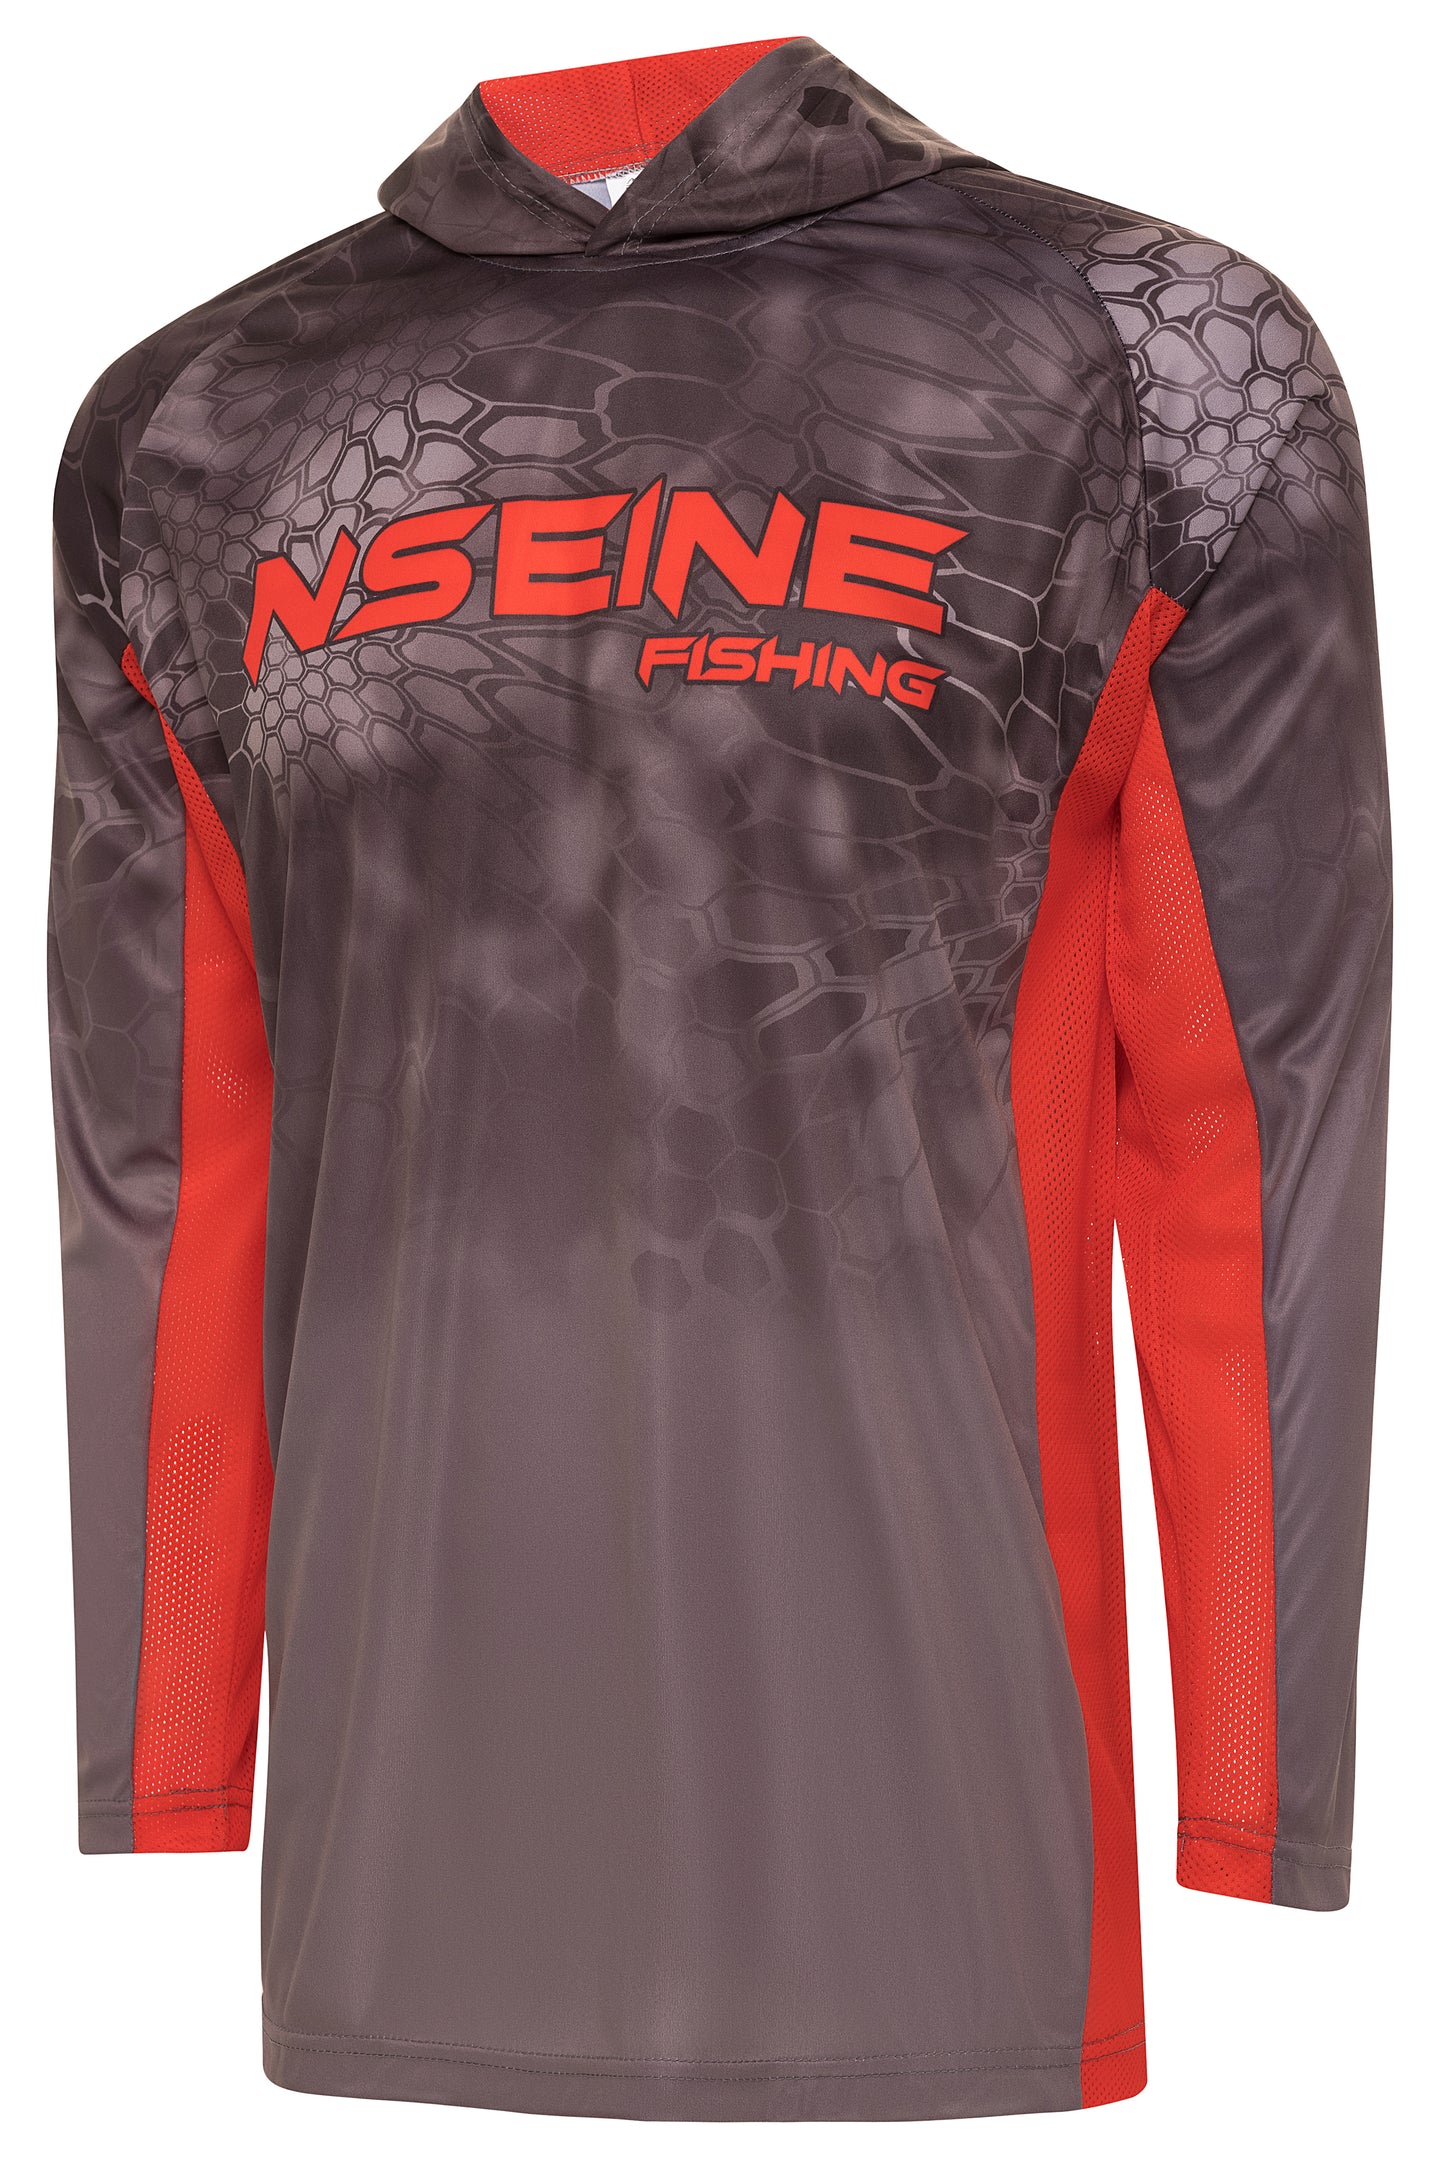 NSEINE Gray/Lava Vented/Hooded Long Sleeve Fishing Shirt – ZillaGear Outdoor